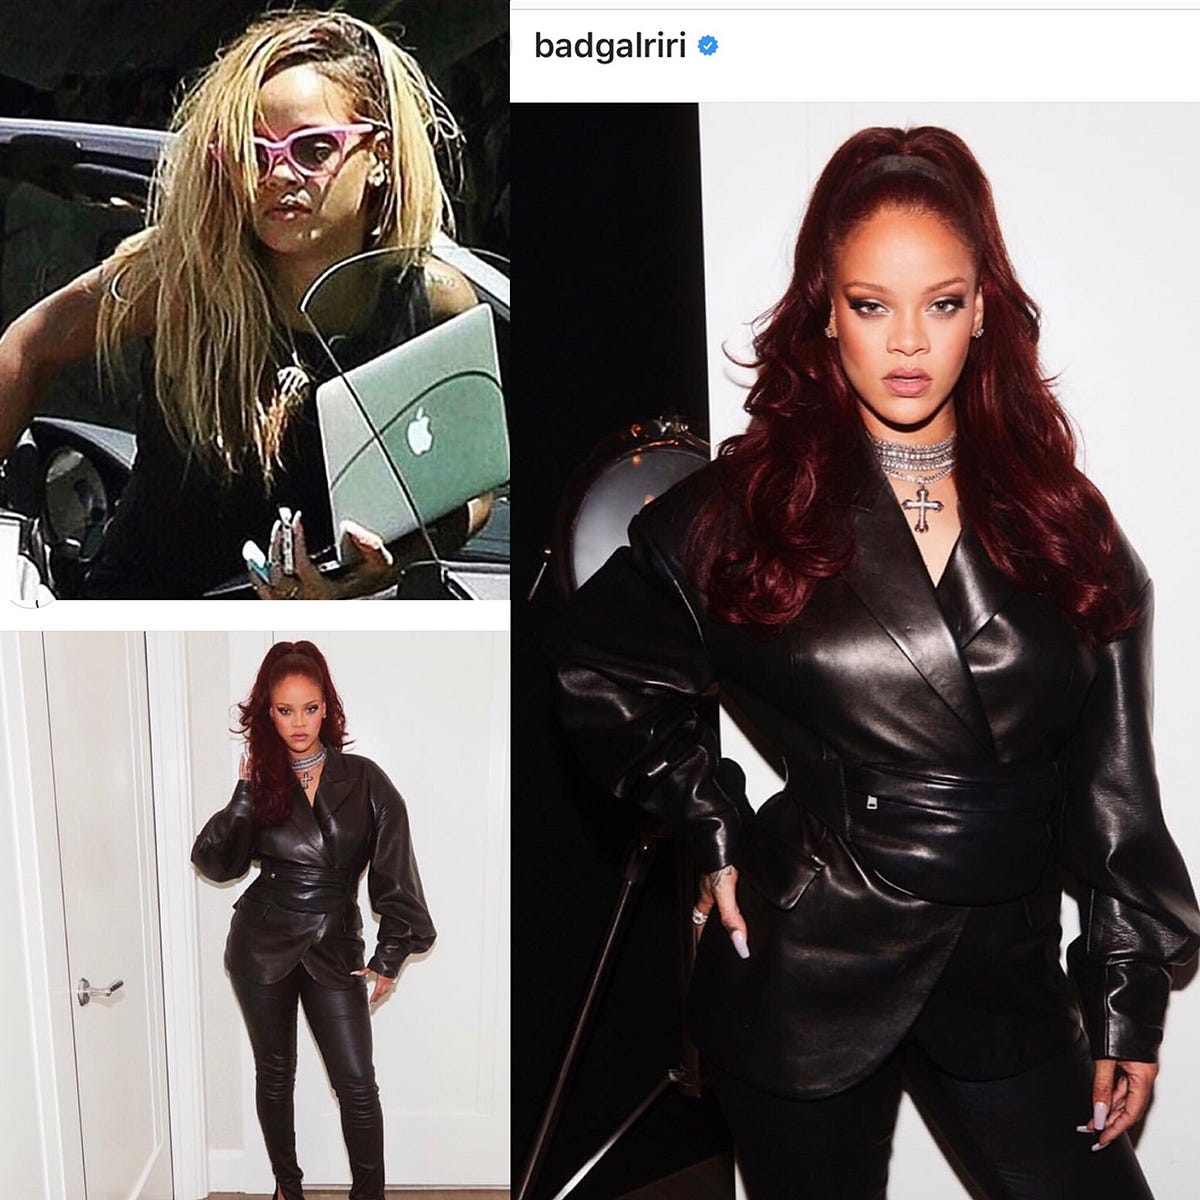 Once upon a time, it looked as if Rihanna may have been struggling just